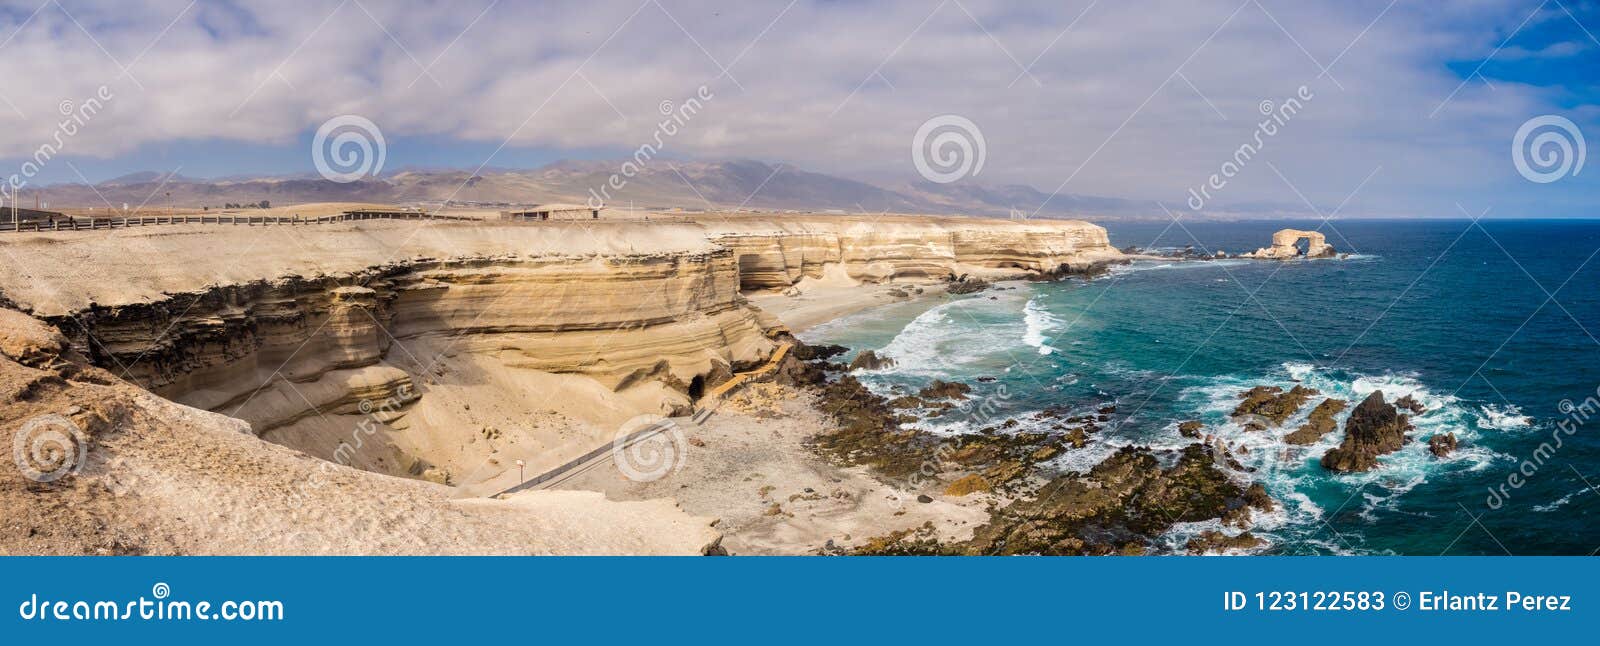 panoramic of the coast near antofagasta city in chile